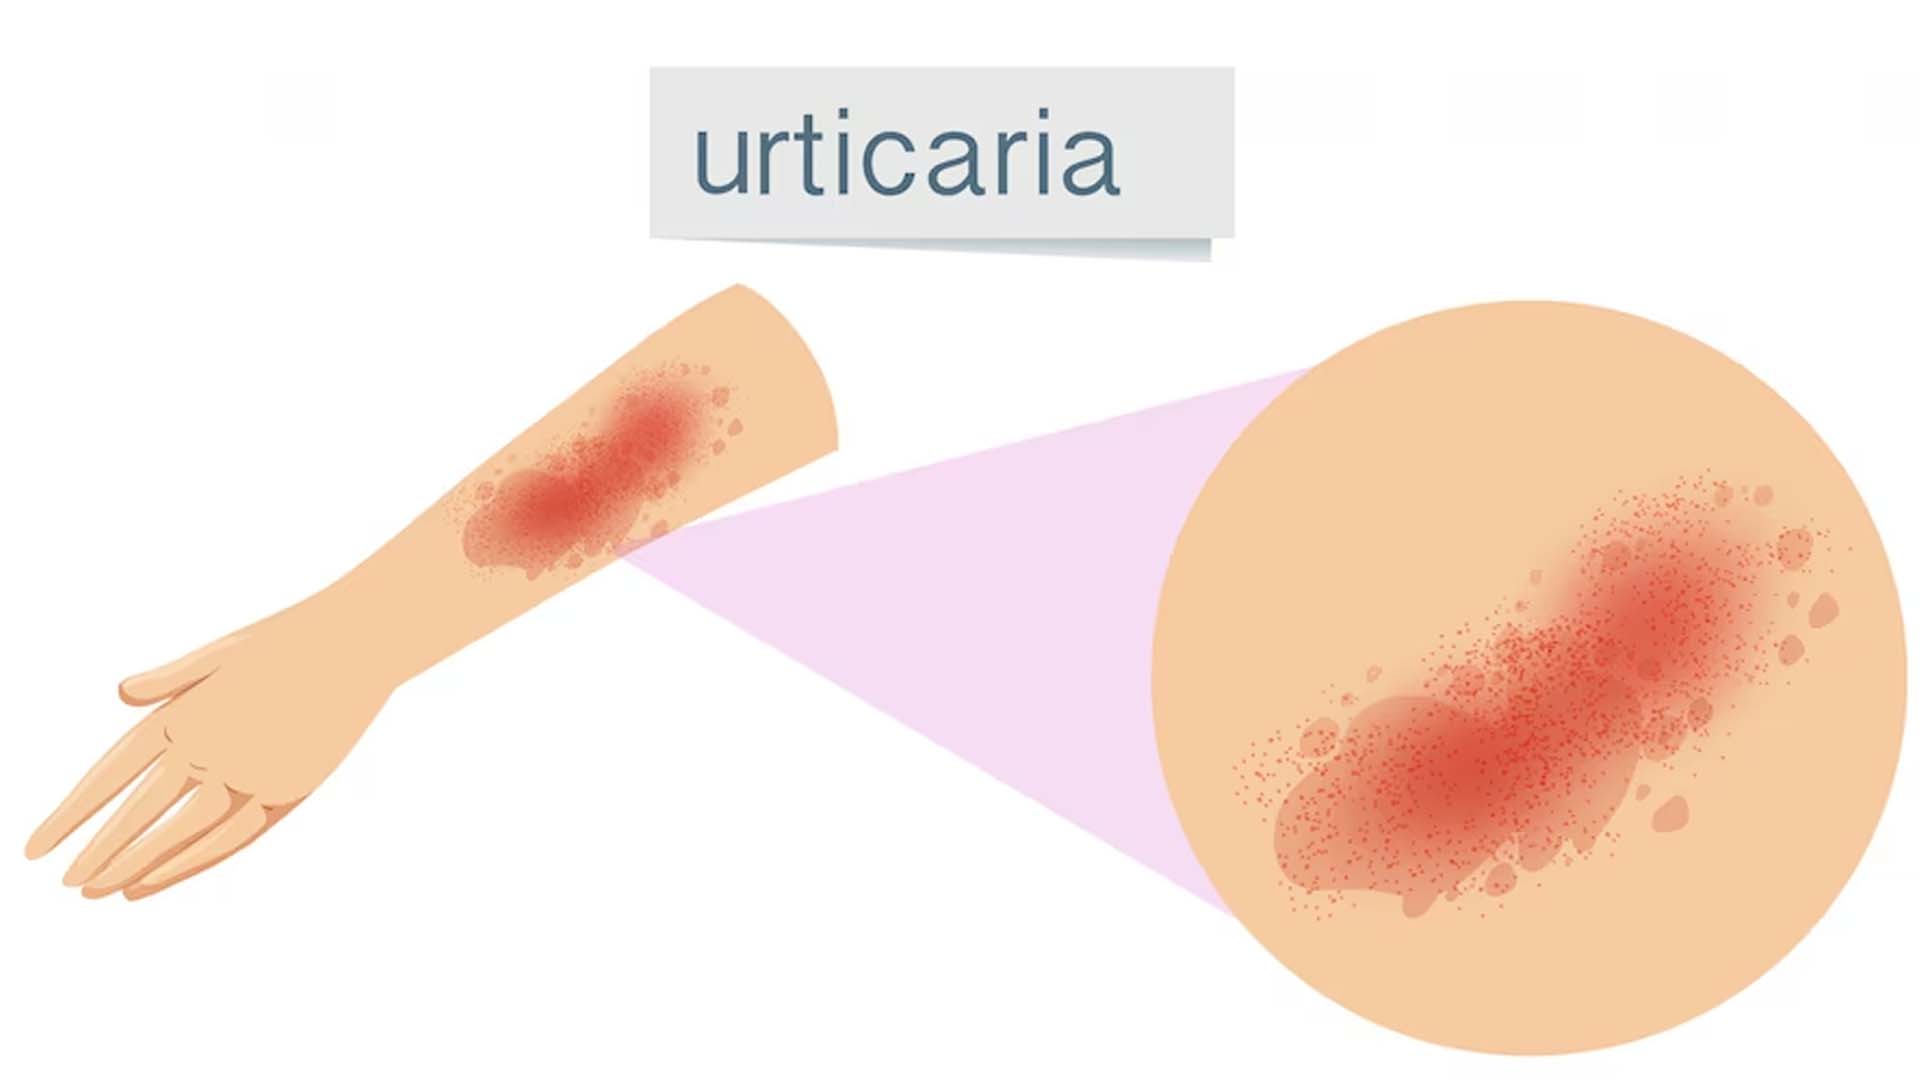 Urticaria or skin infection